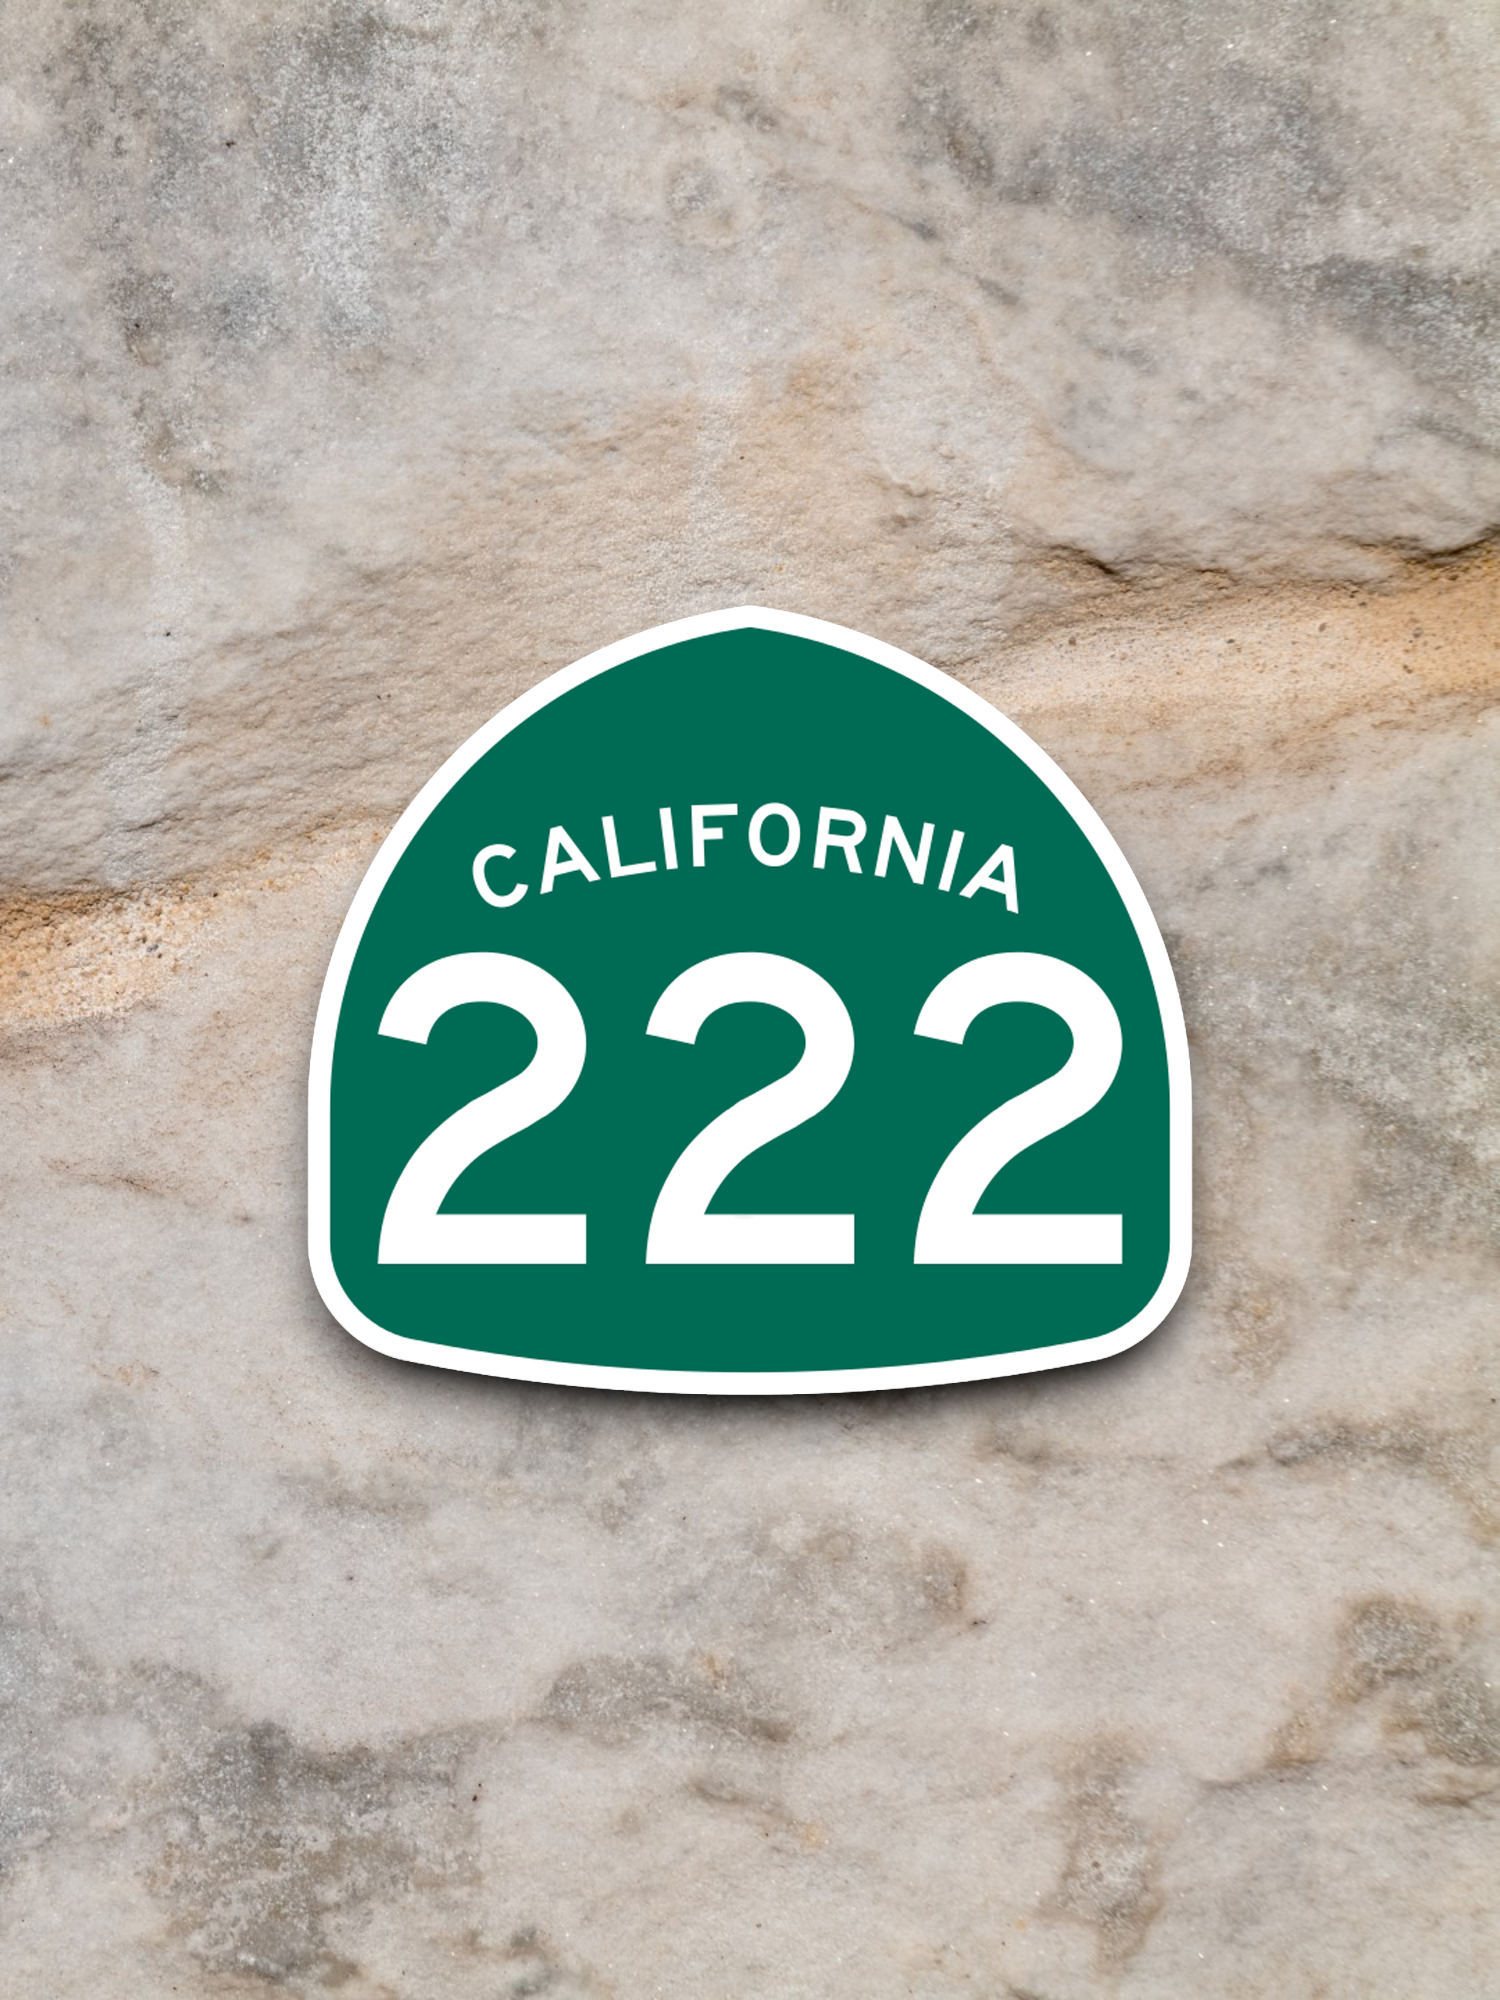 California State Route 222 Road Sign Sticker